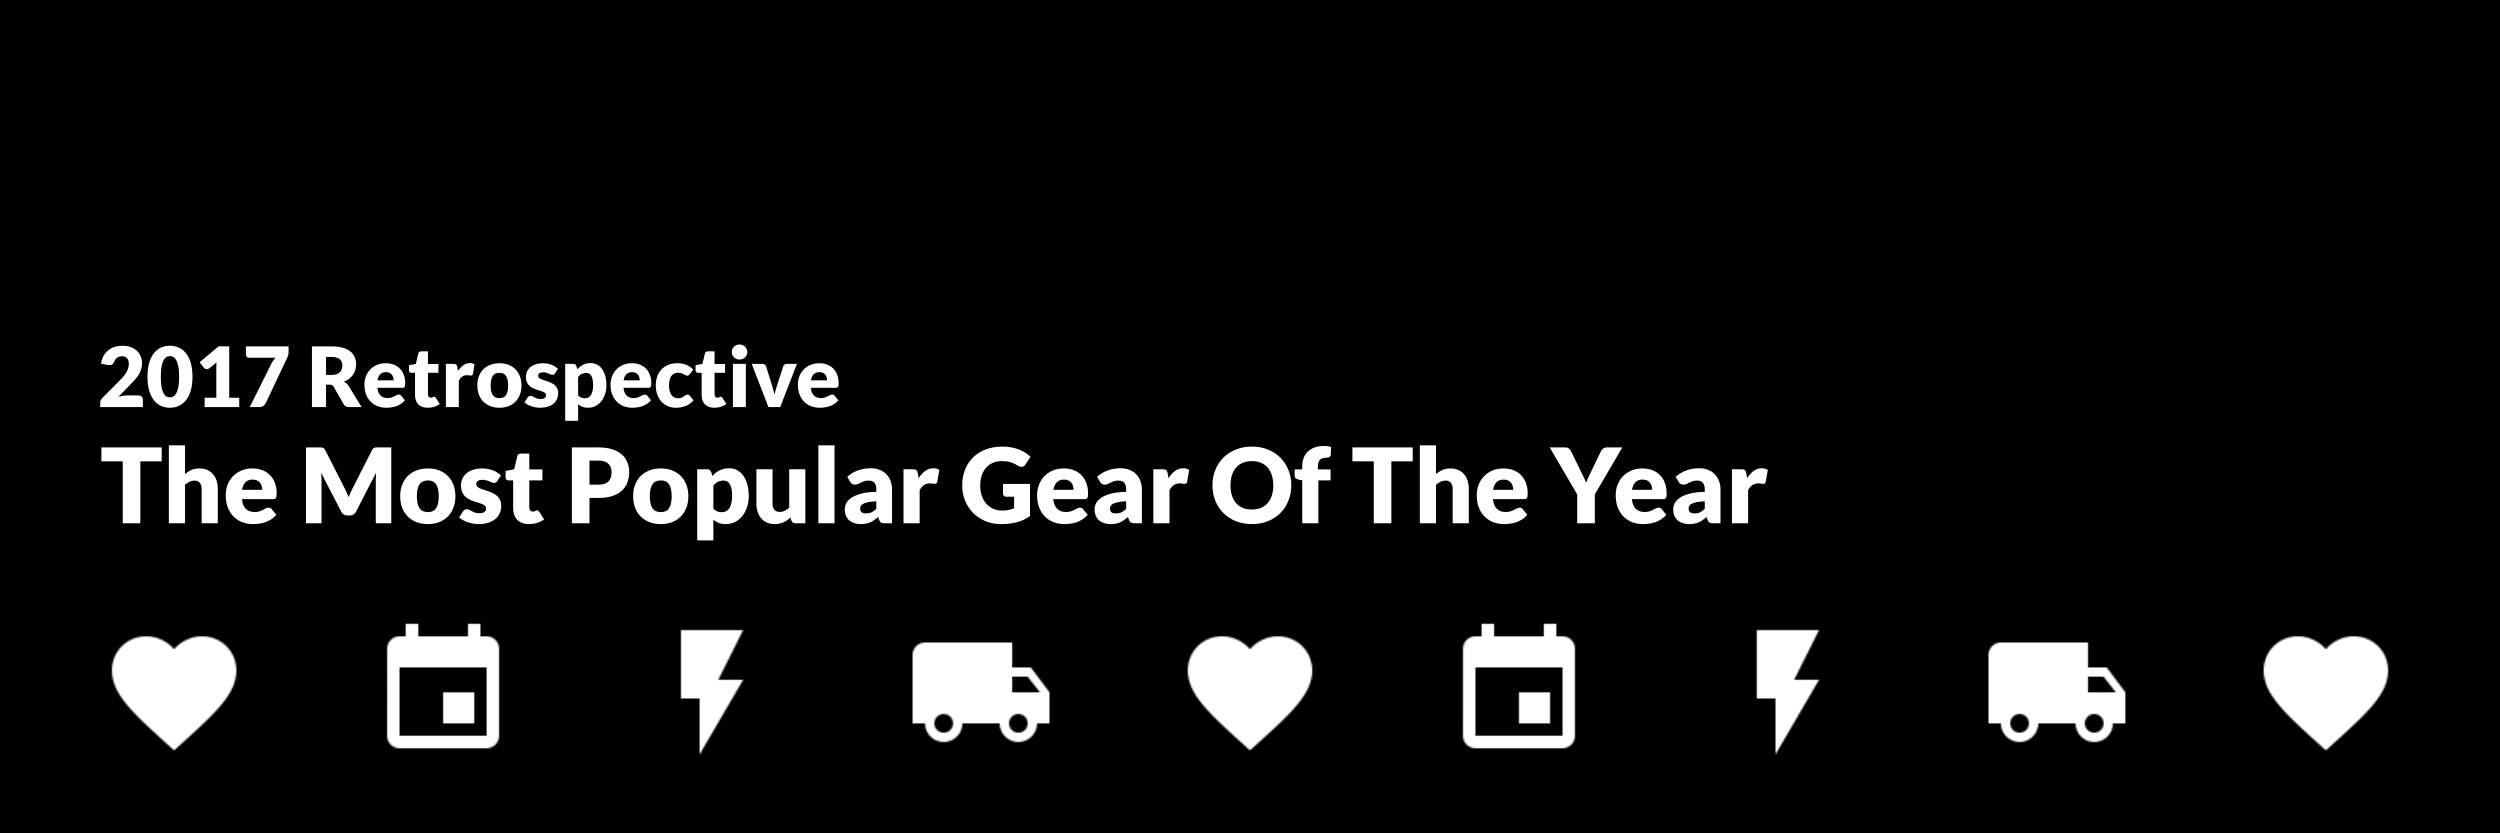 2017 Retrospective - The Most Popular Gear Of The Year